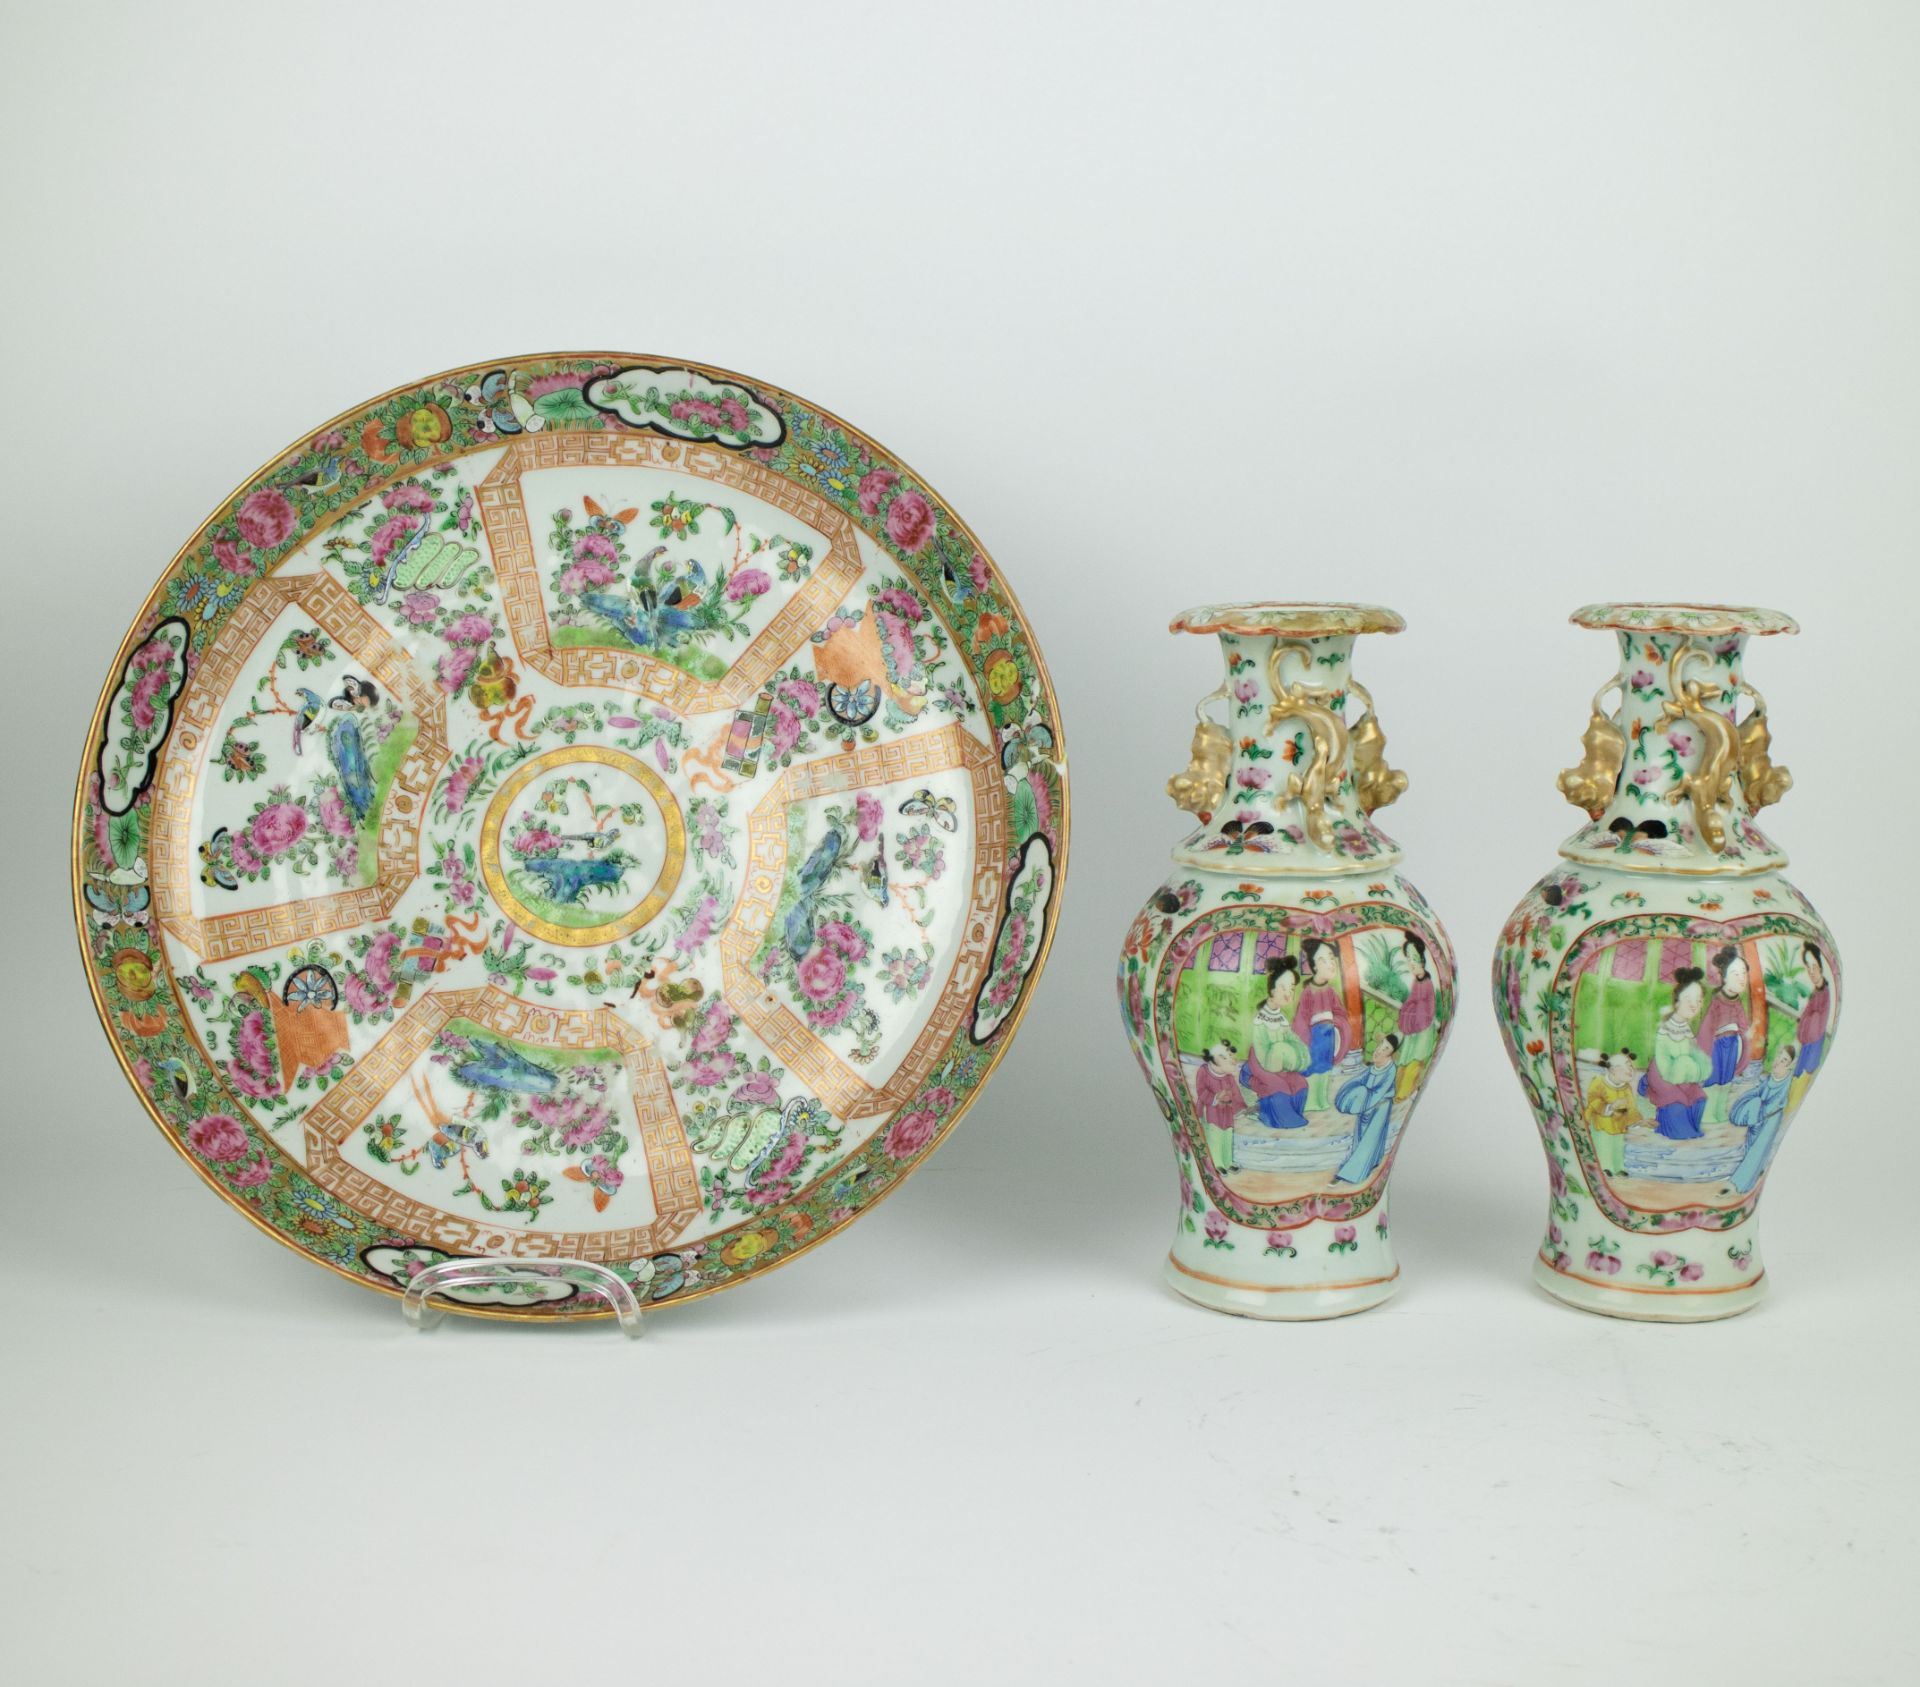 2 Canton vases and a plate